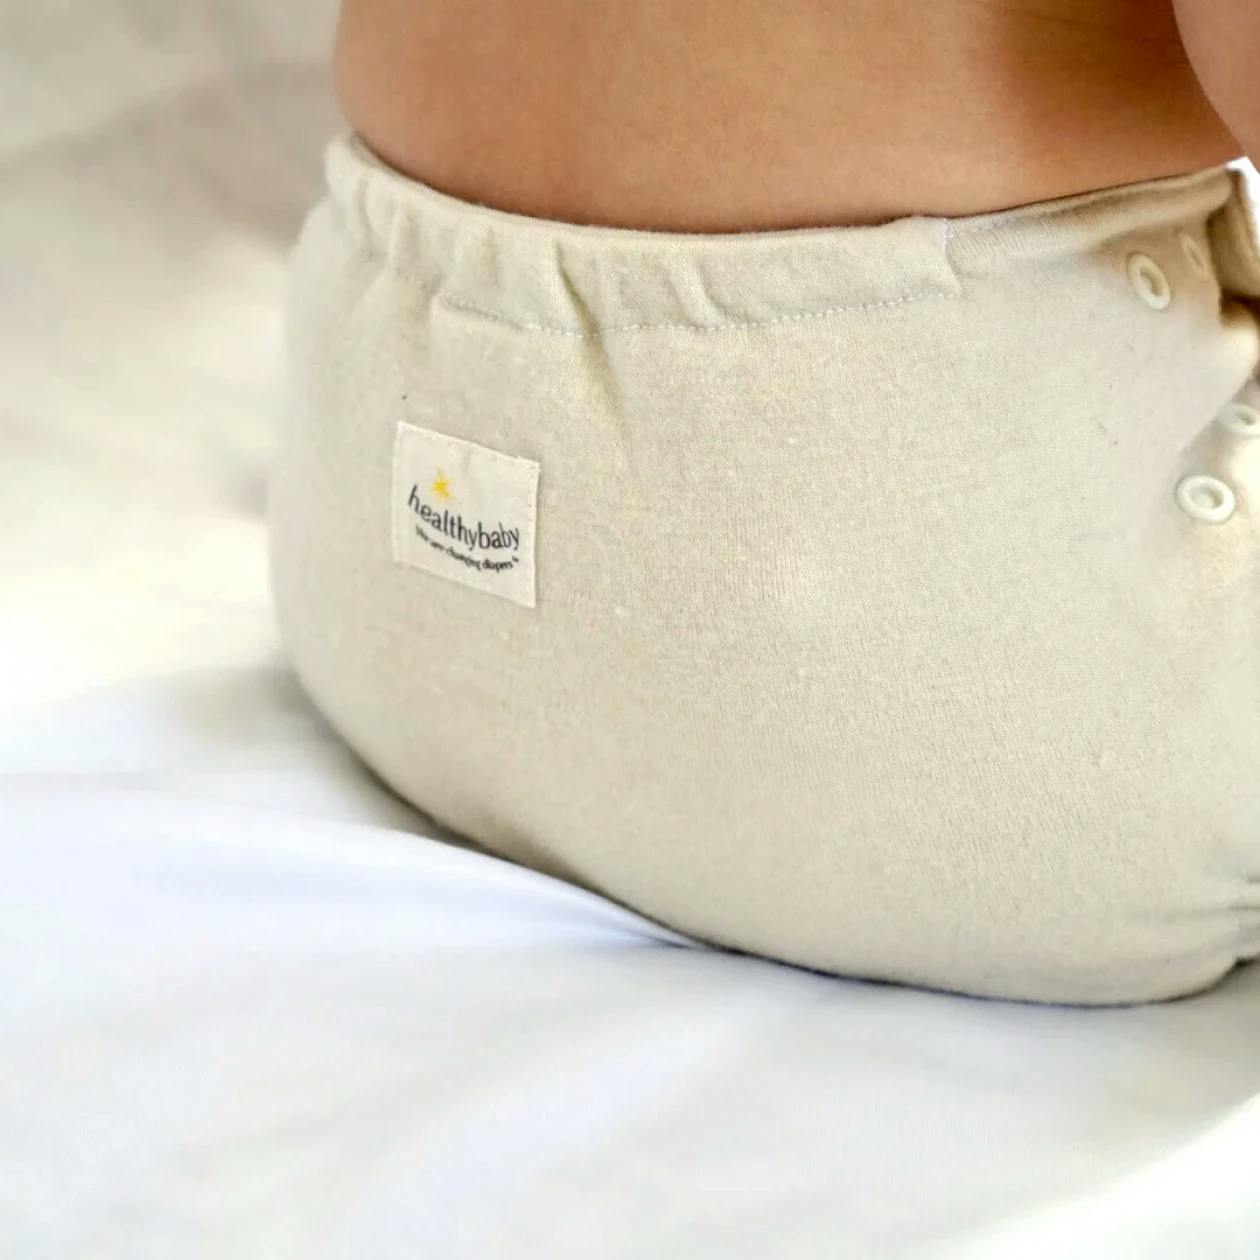 Our Cloth Diaper - HealthyBaby